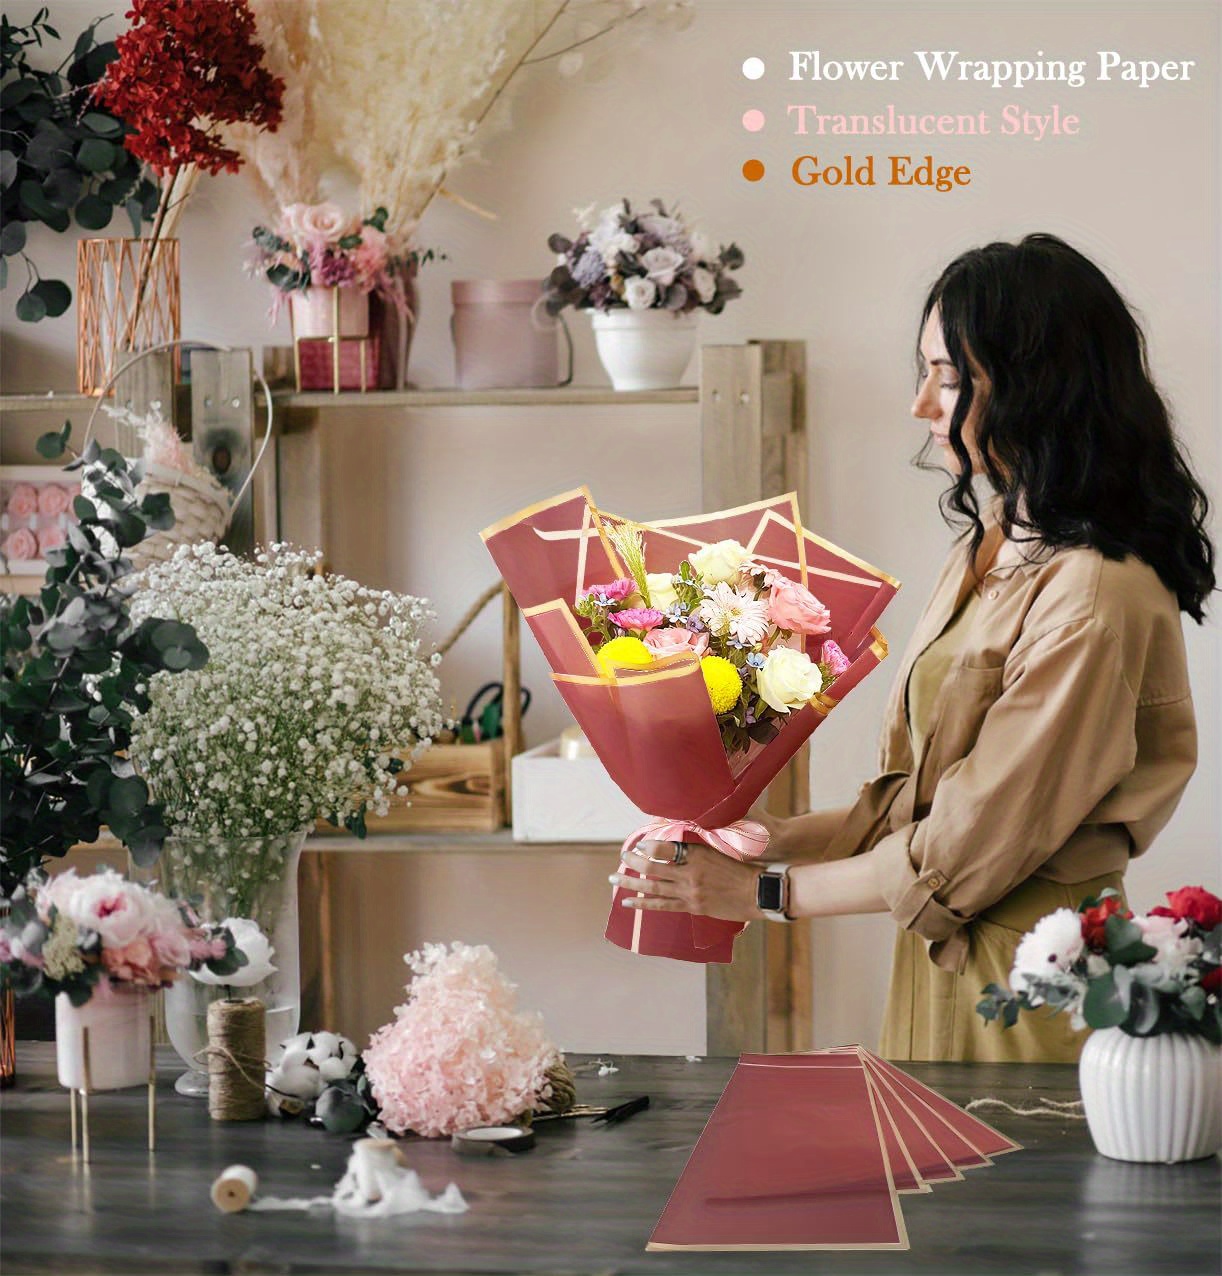 Monarch Bloom Flowers 20 Pcs Bouquet Wrapping Paper - Premium Matte Flower Paper Wrap - Waterproof Floral Wrapping Paper - 20 Double-Sided 22.8 x